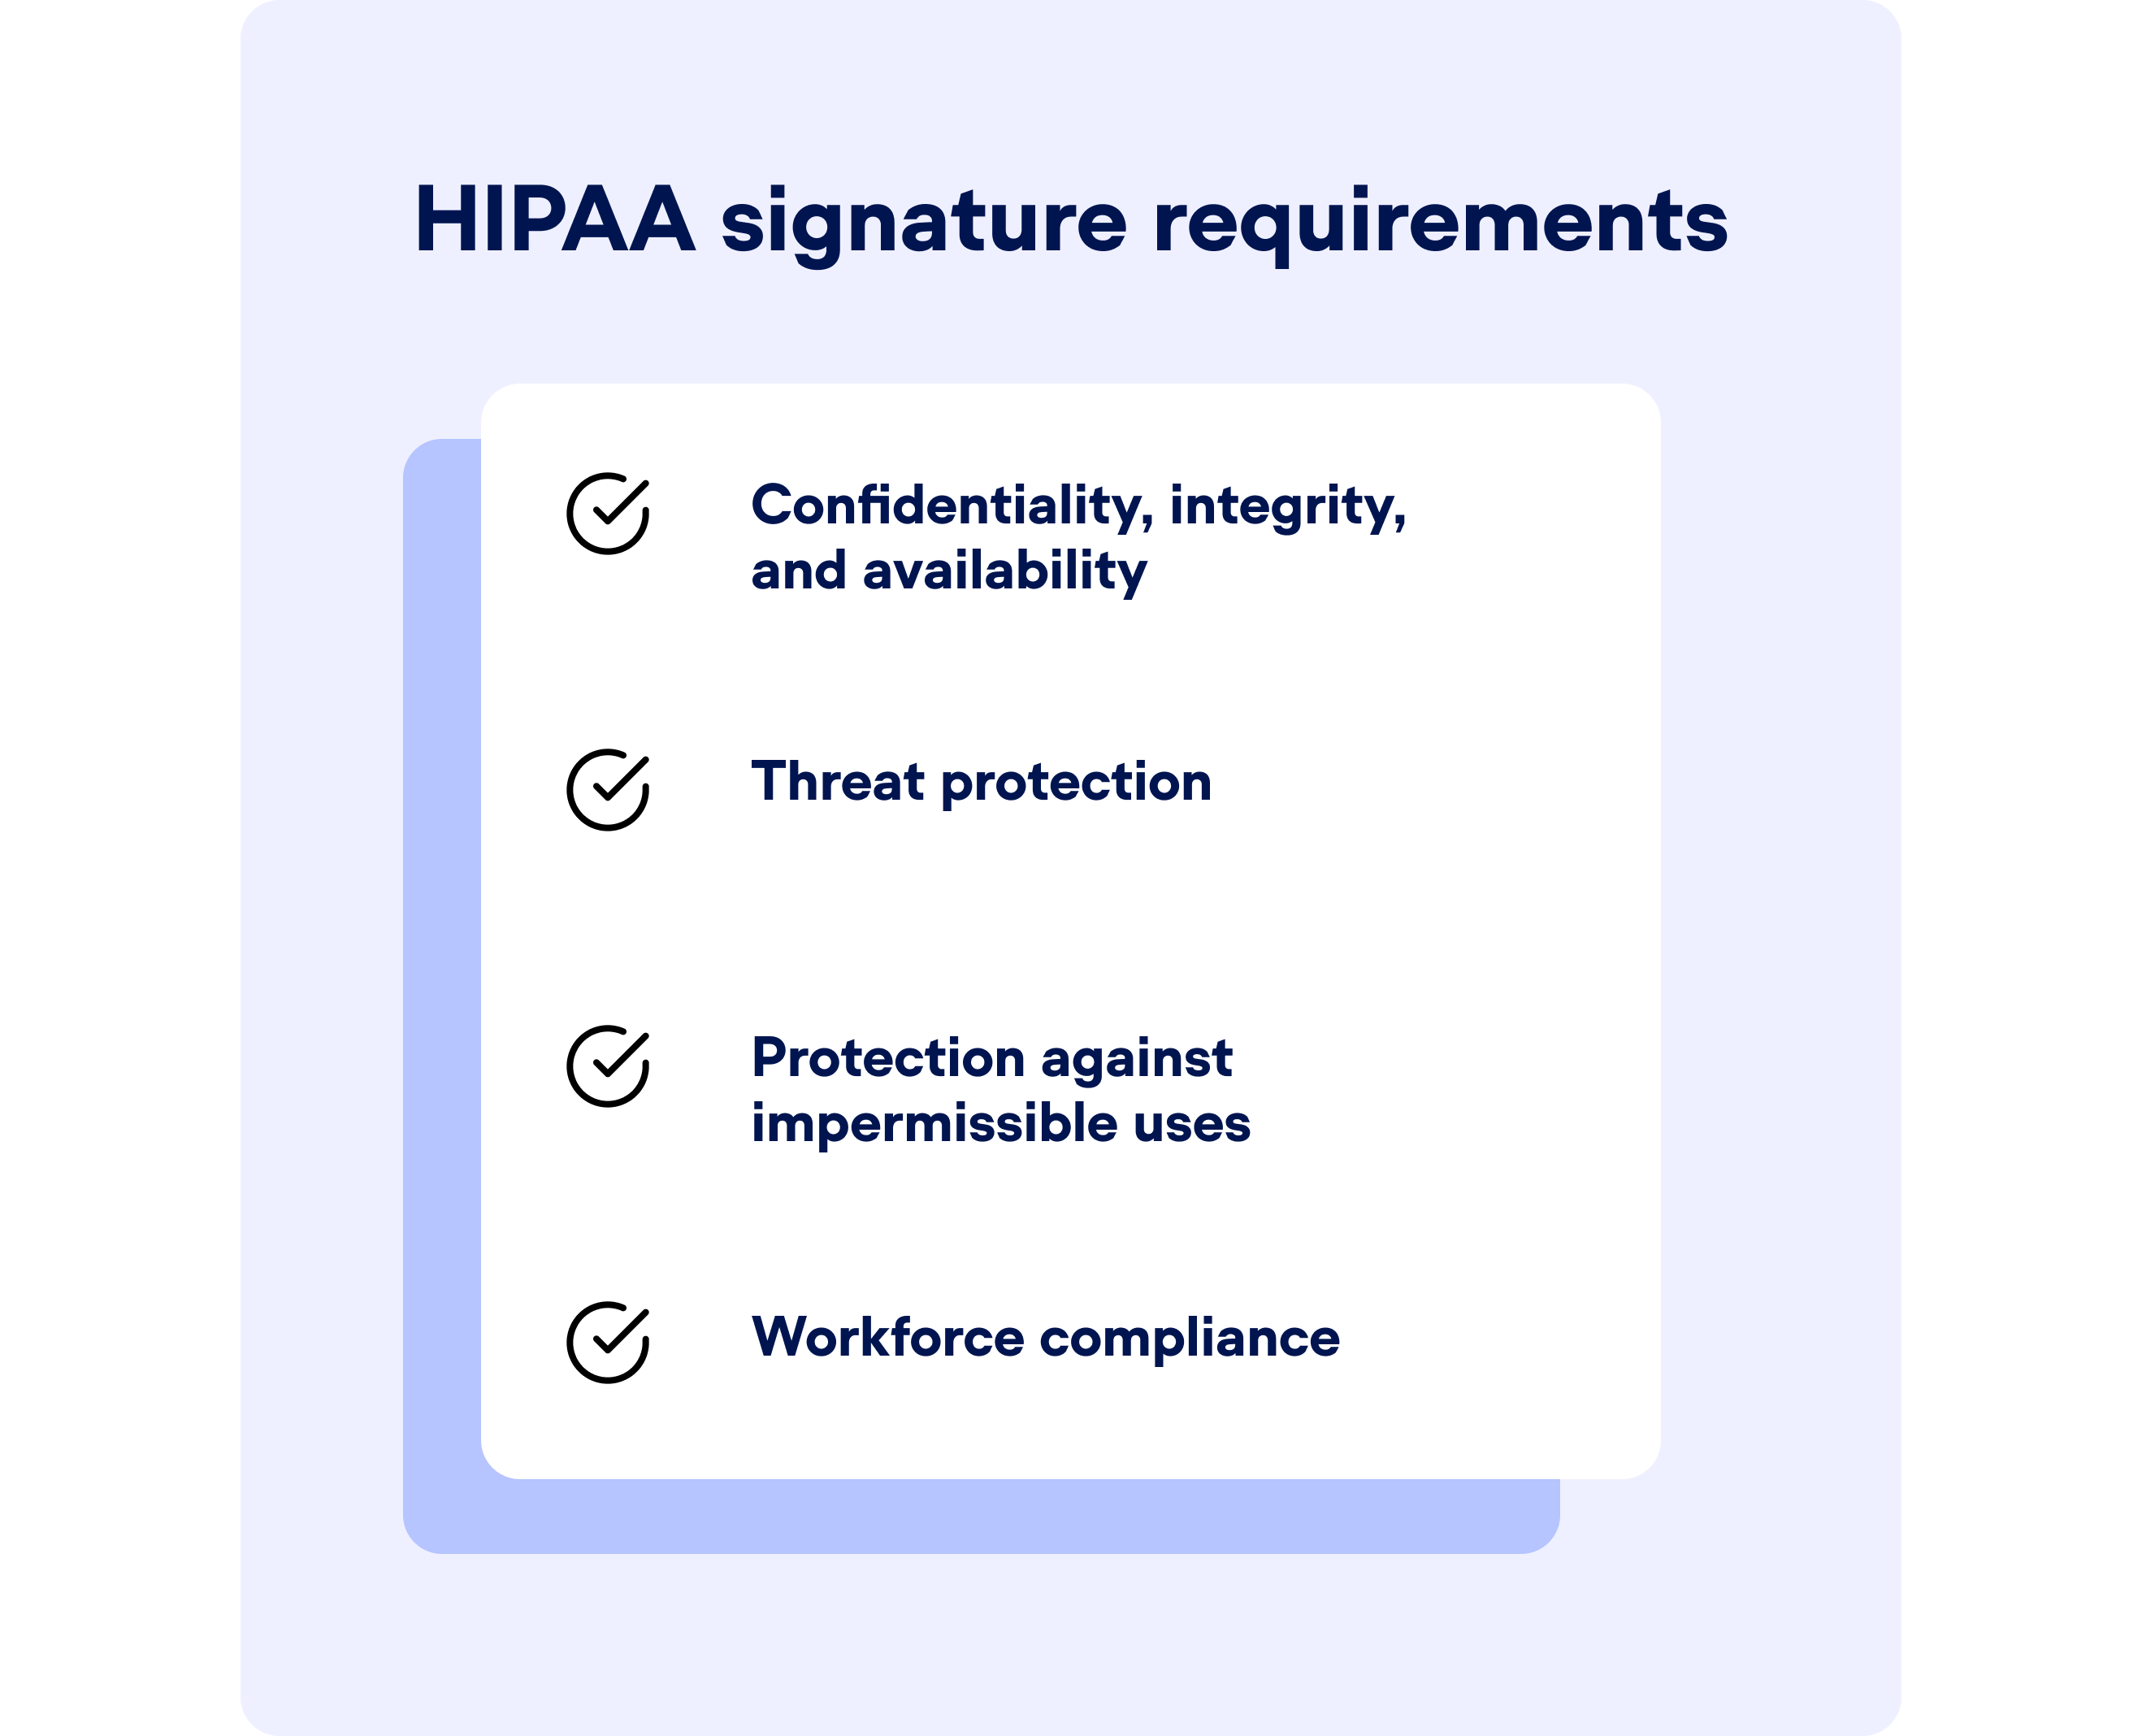 Infographic listing the HIPAA signature requirements. The list states 4 requirements: 1) Confidentiality, integrity, and availability, 2) Threat protection, 3) Protection against impermissible uses, 4) Workforce compliance.